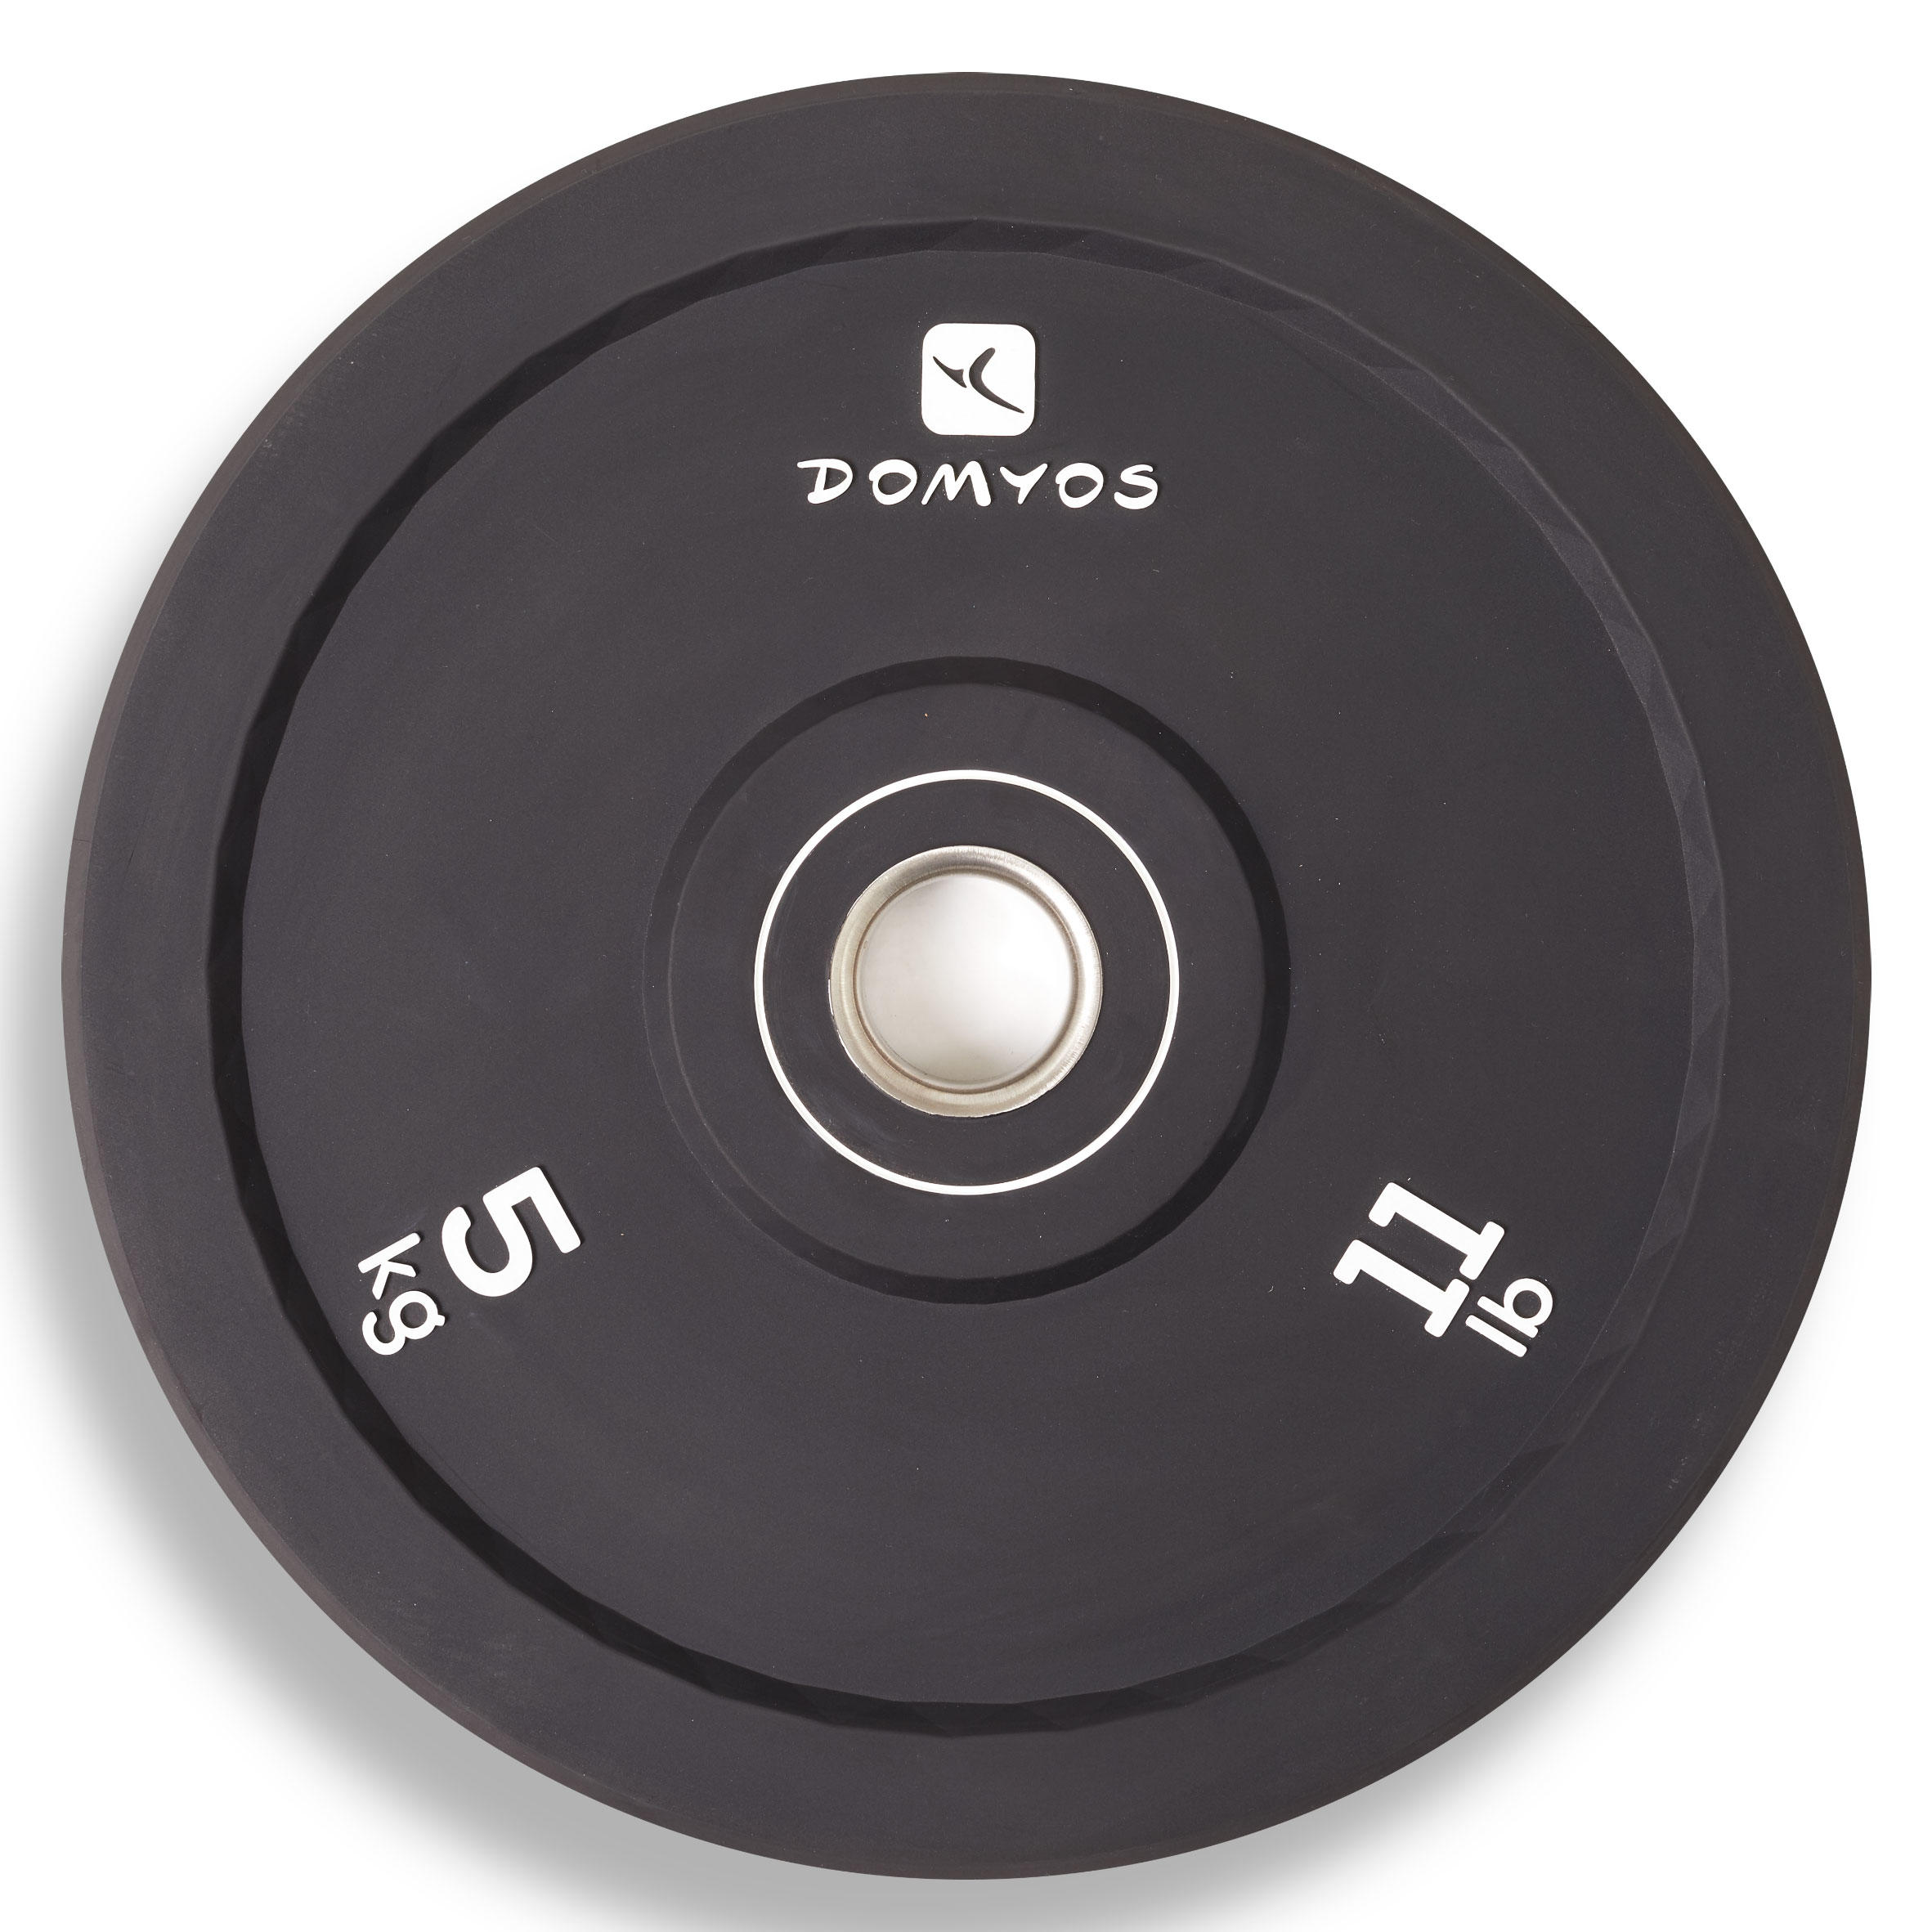 Gym Weight Plates - Buy Bumper Weight 